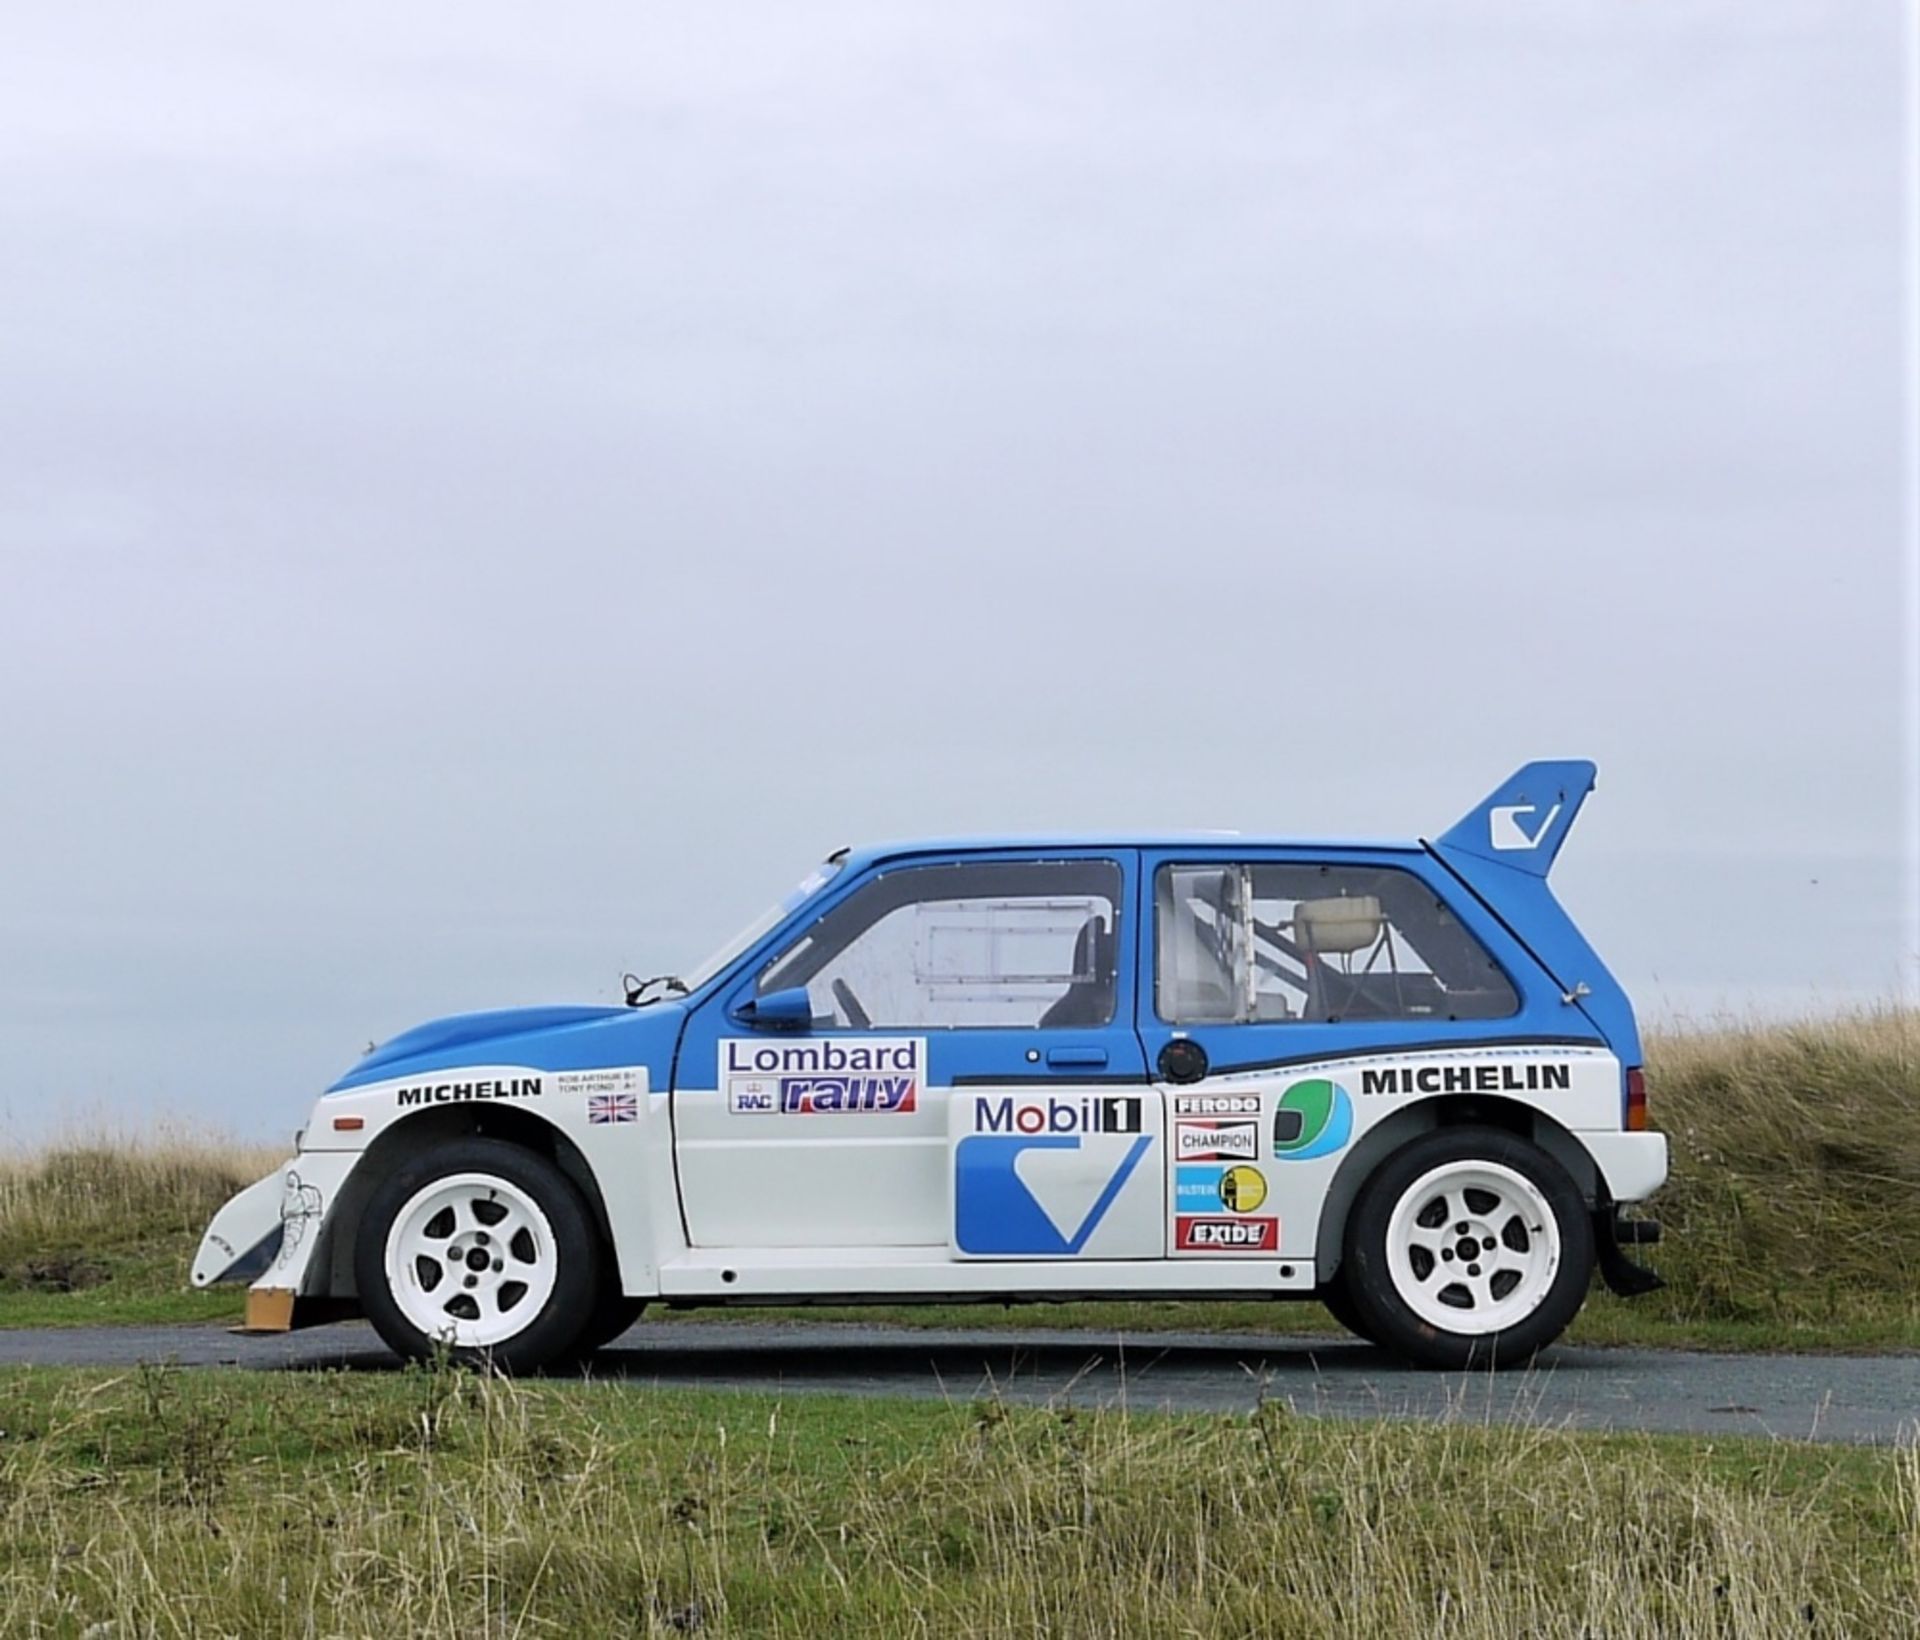 1985 MG Metro 6R4 Works Rally Car Registration Number: C874 EUD Chassis Number: #134  The MG Metro - Image 8 of 31